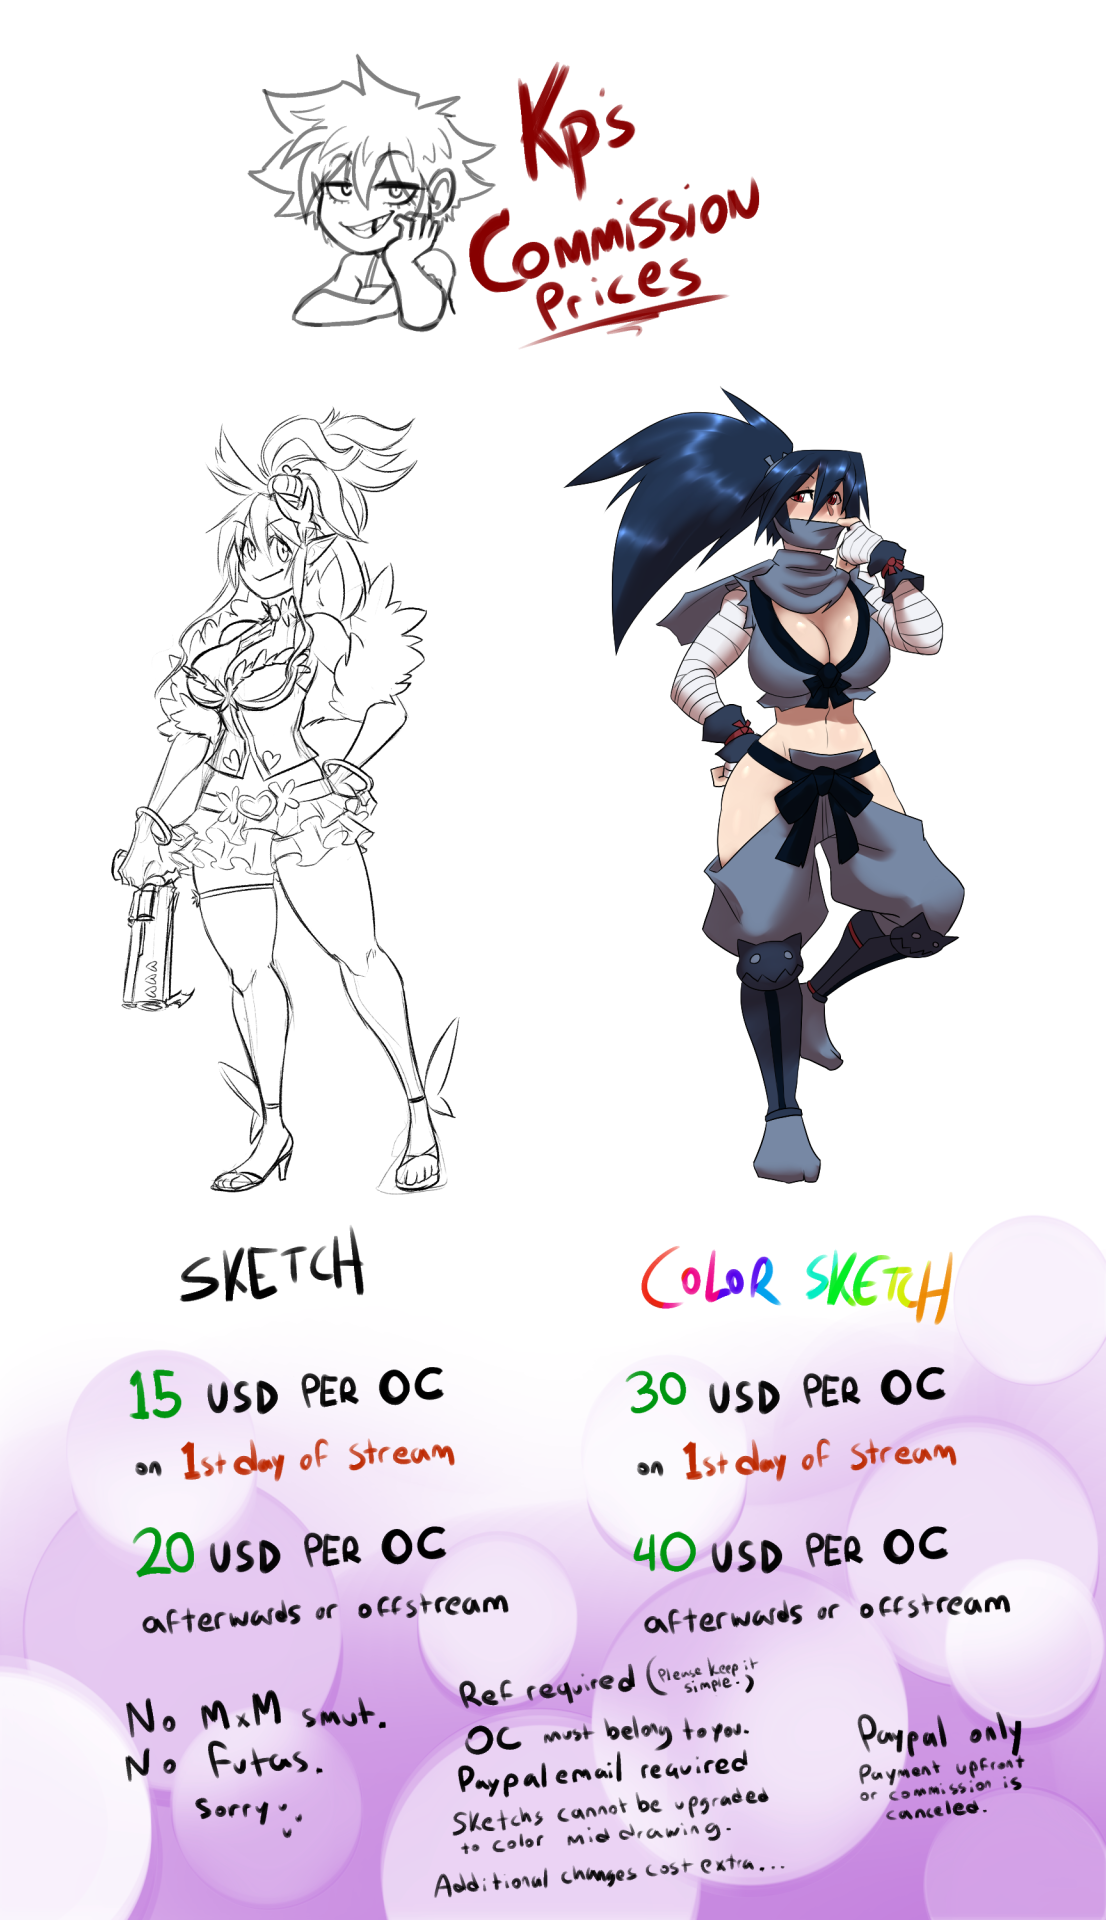   Commission Prices up to date!